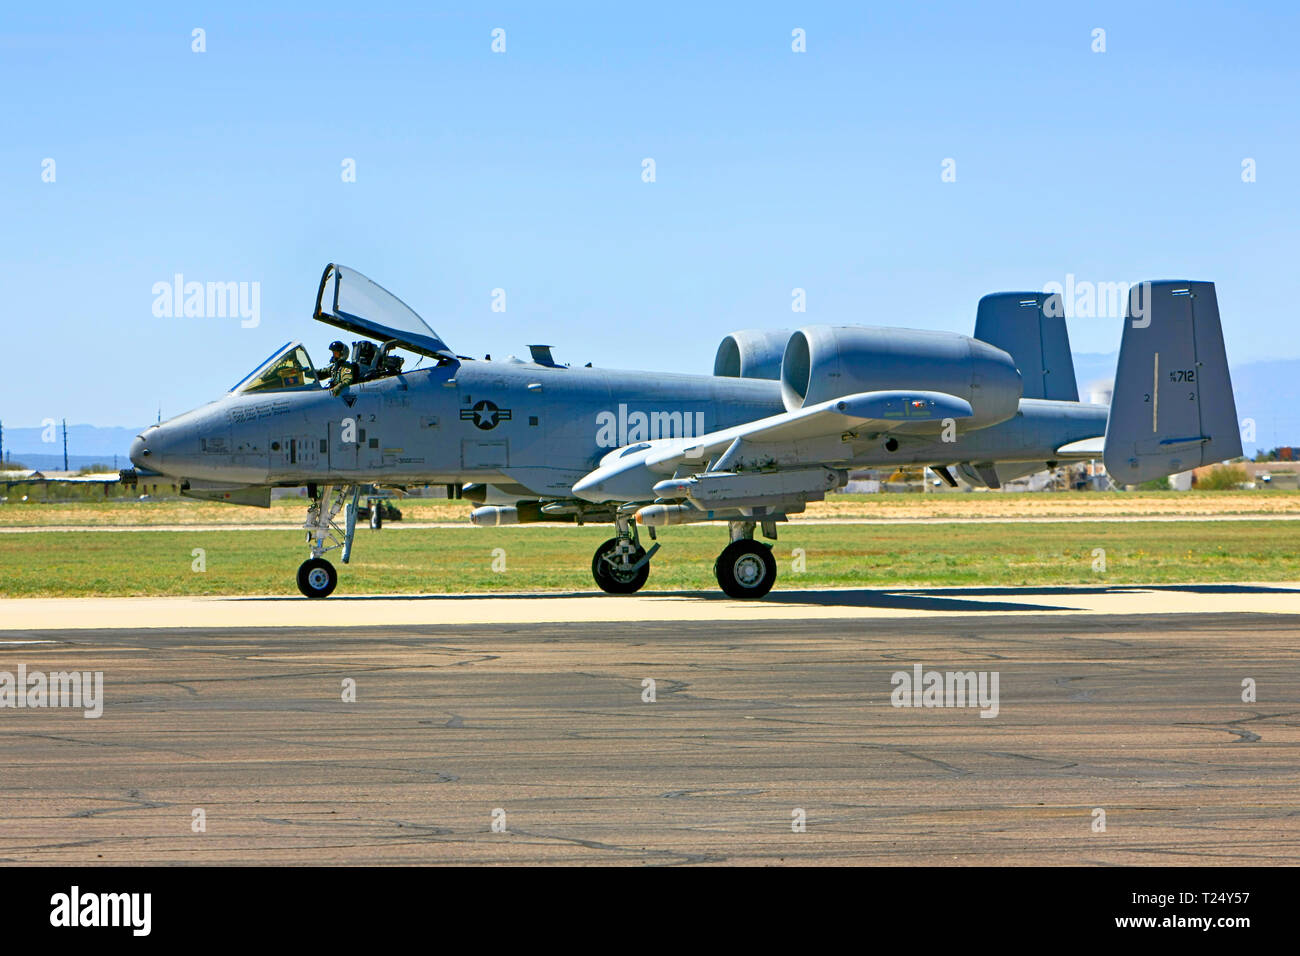 Modern A-10 Warthog tankbuster fighter plane of the US Air Force at the Davis-Monthan AFB in Tucson AZ Stock Photo